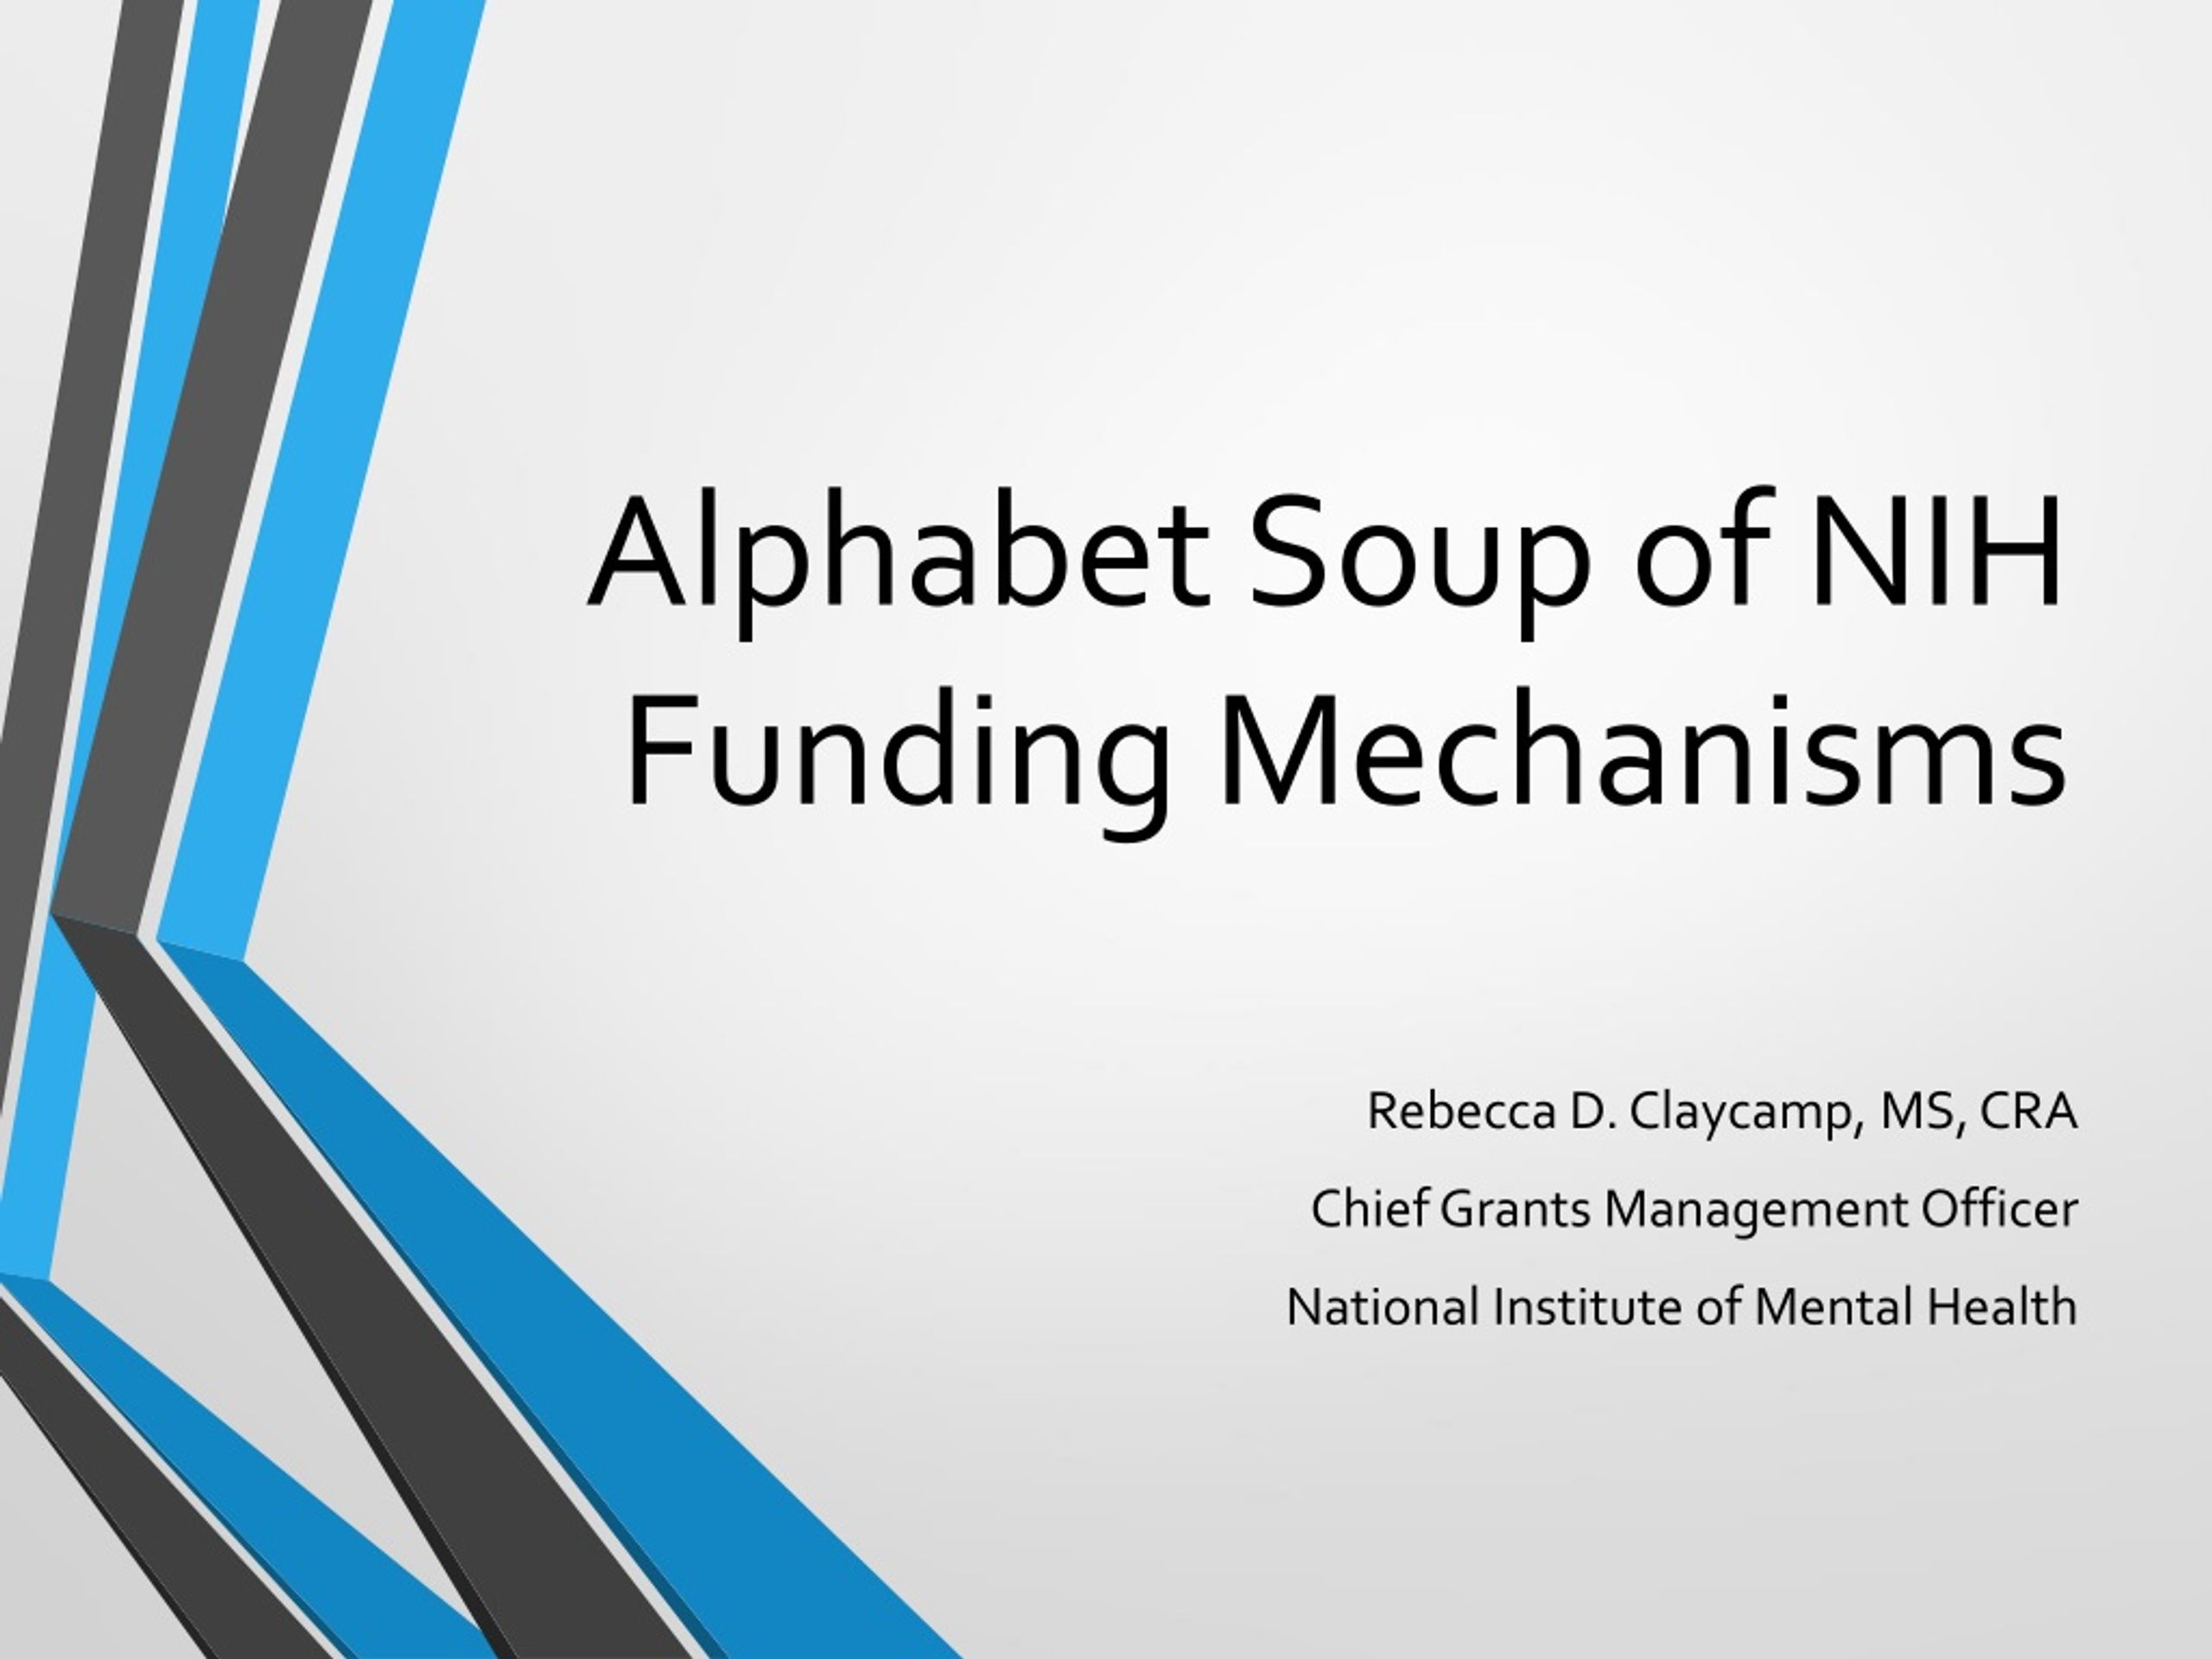 Ppt Alphabet Soup Of Nih Funding Mechanisms Powerpoint Presentation Free Download Id 1282803